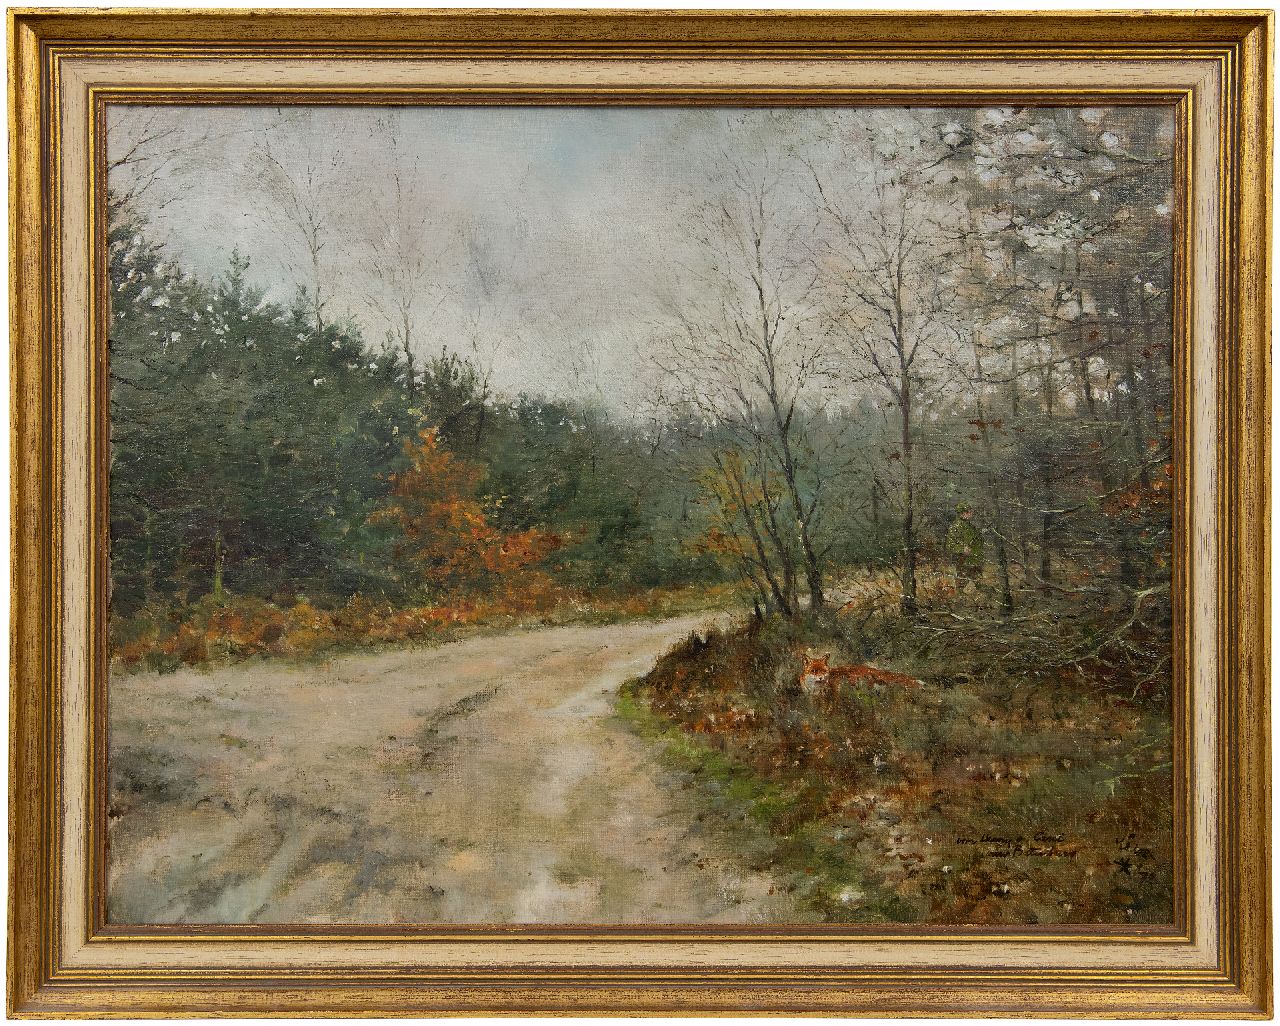 Poortvliet R.  | Rien Poortvliet, Fox in forest landschape, oil on canvas 50.4 x 65.7 cm, signed l.r. and dated '72